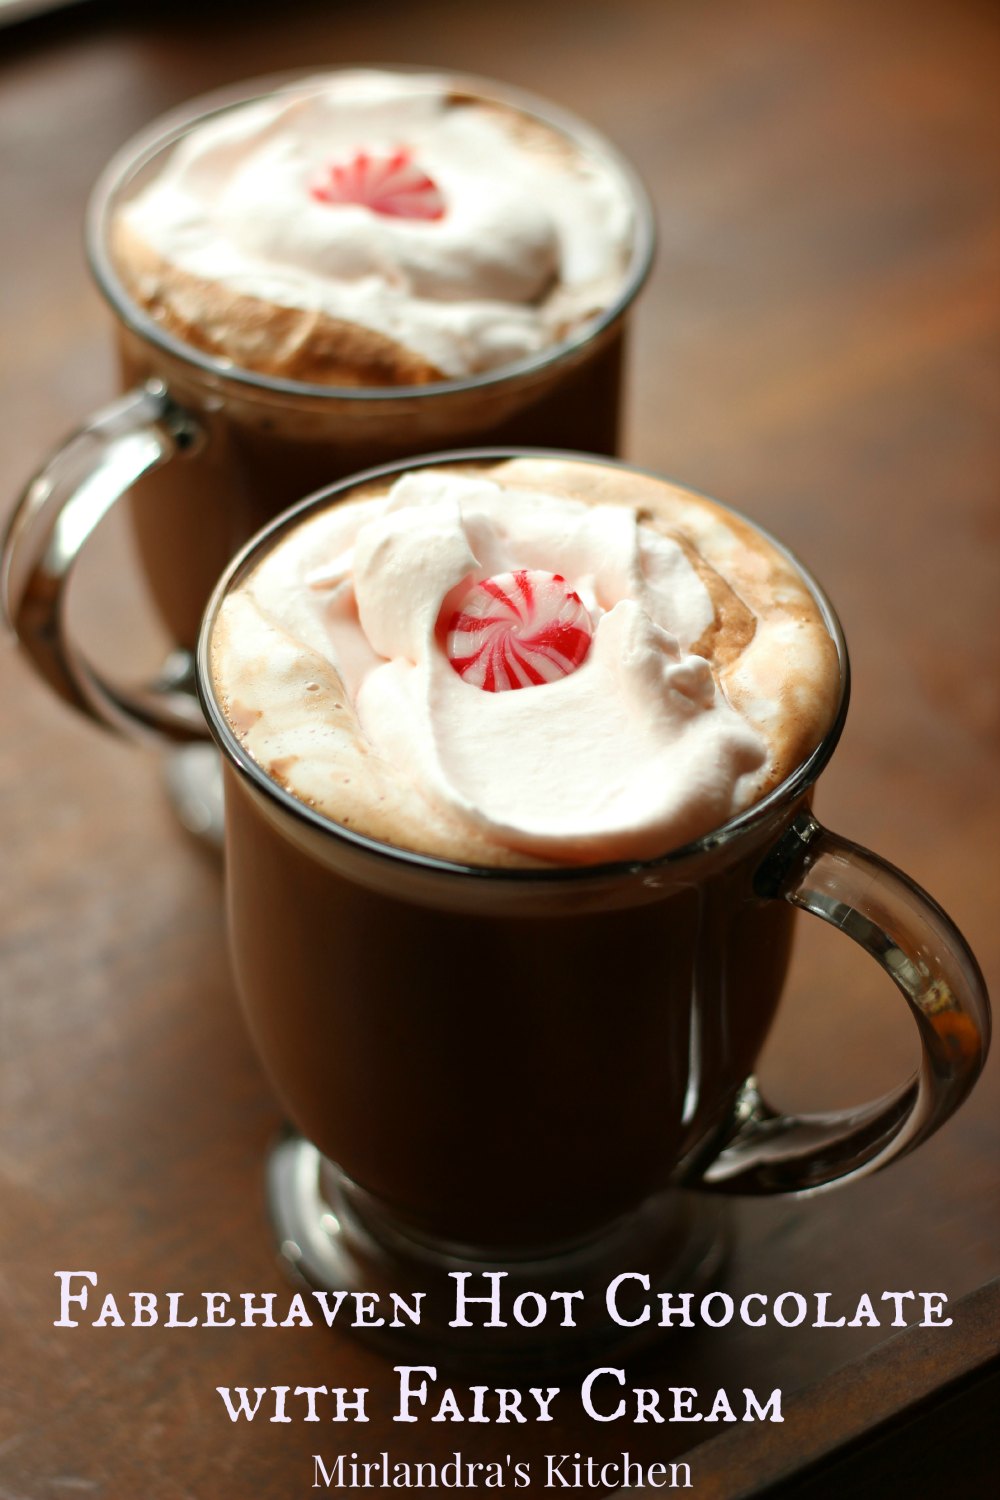 Deliciously rich hot chocolate is the perfect homemade winter drink. My mom made hot chocolate with me when I was a little girl and it made the best memories. Take some time this winter and make some from scratch - you won't regret it. And...if your kids are reading the Fablehaven books this is the perfect treat to share with them! 